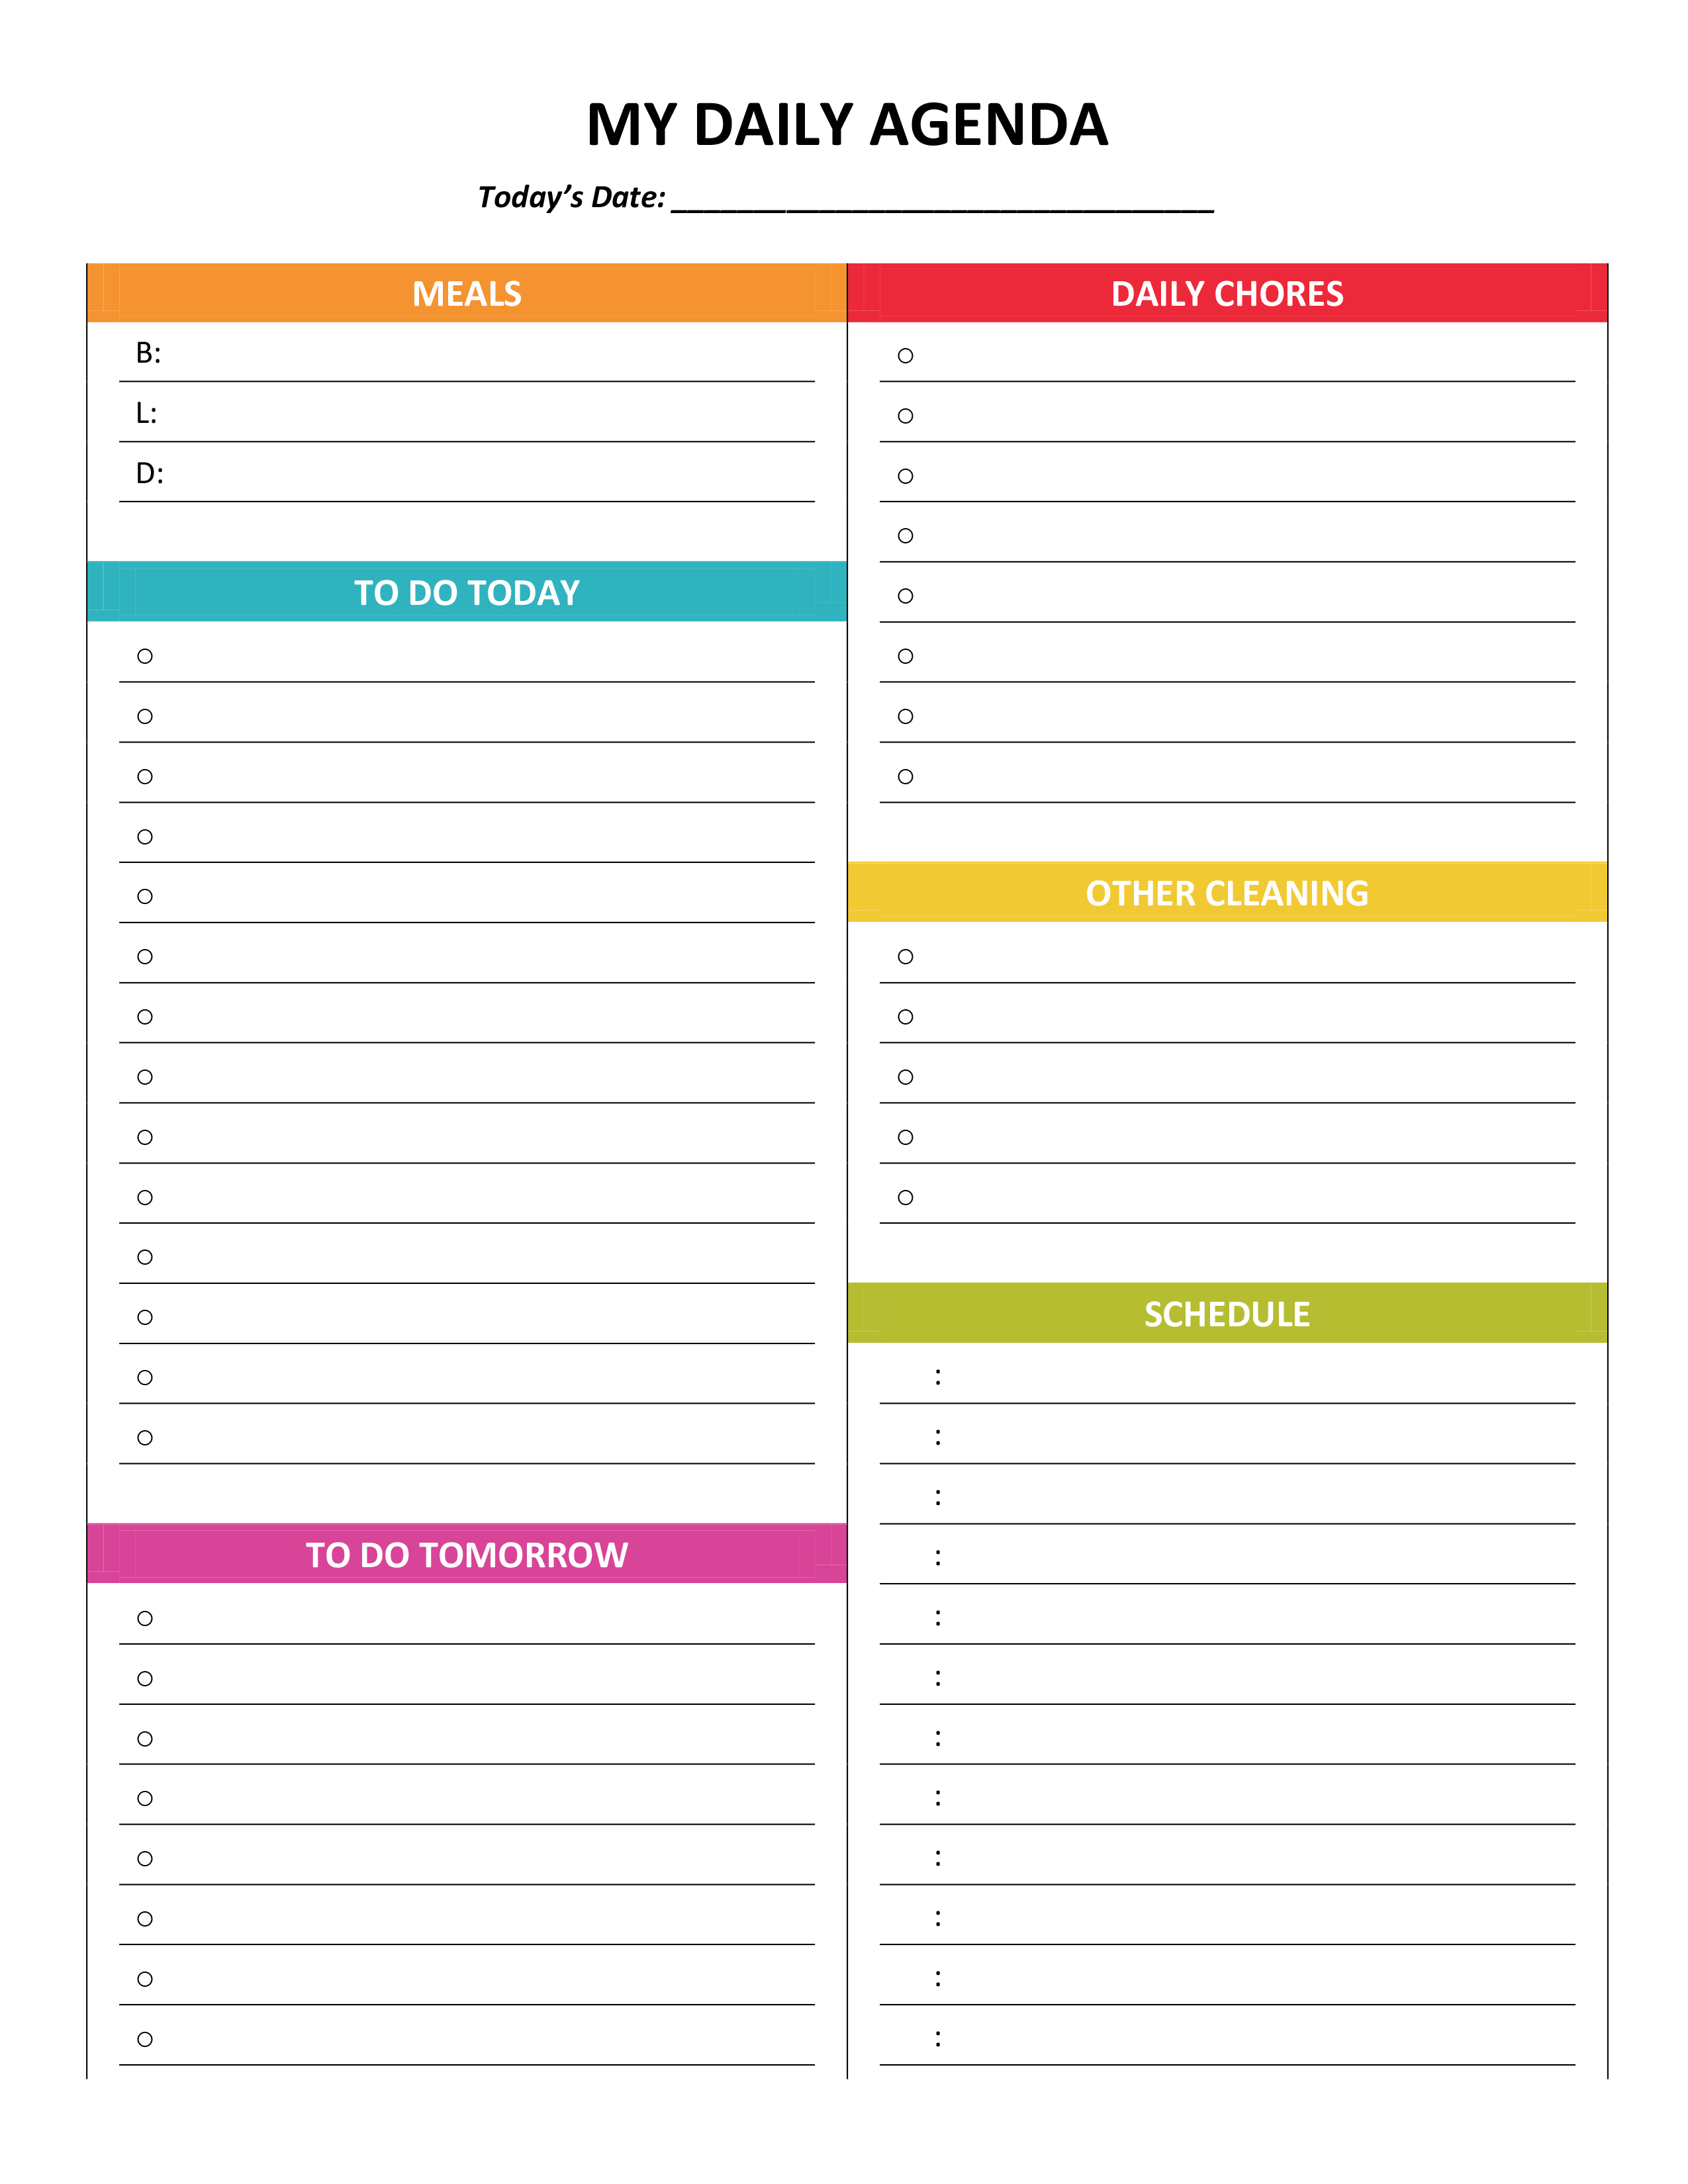 7-best-images-of-printable-daily-agenda-template-free-printable-daily